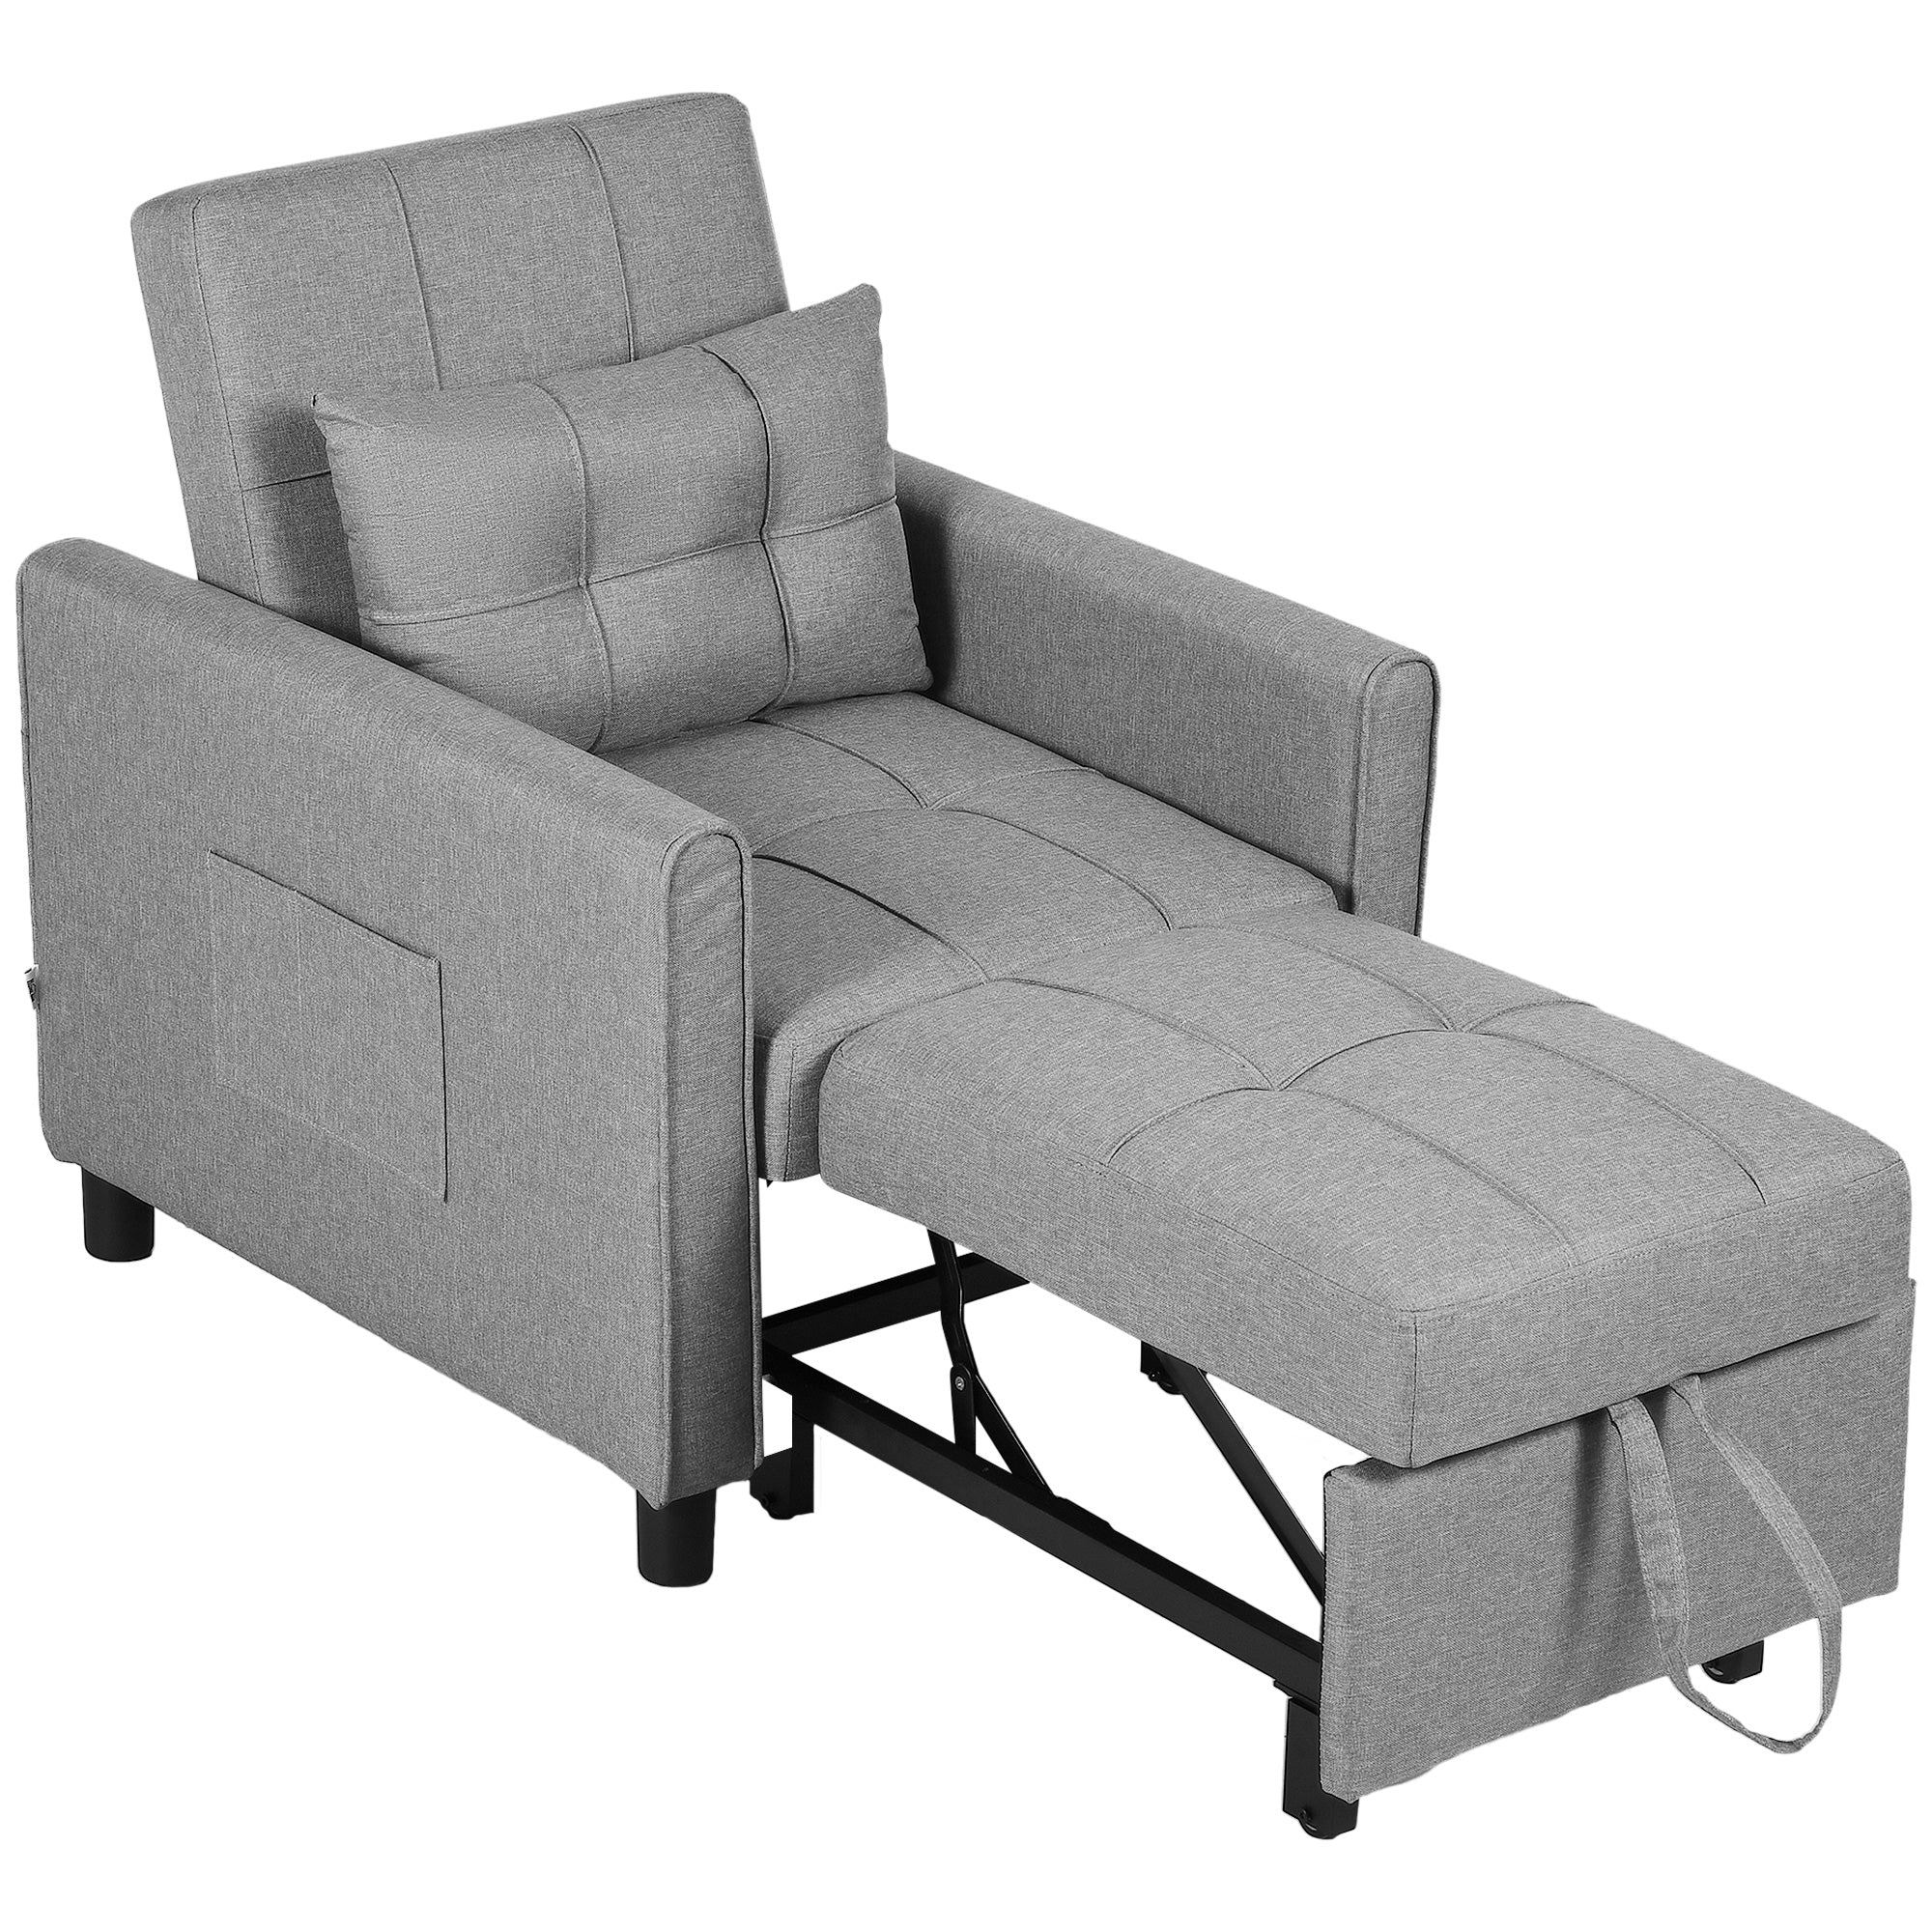 3-In-1 Convertible Chair Bed, Pull Out Sleeper Chair, Fold Out Bed with Adjustable Backrest, Side Pockets, Light Grey-0